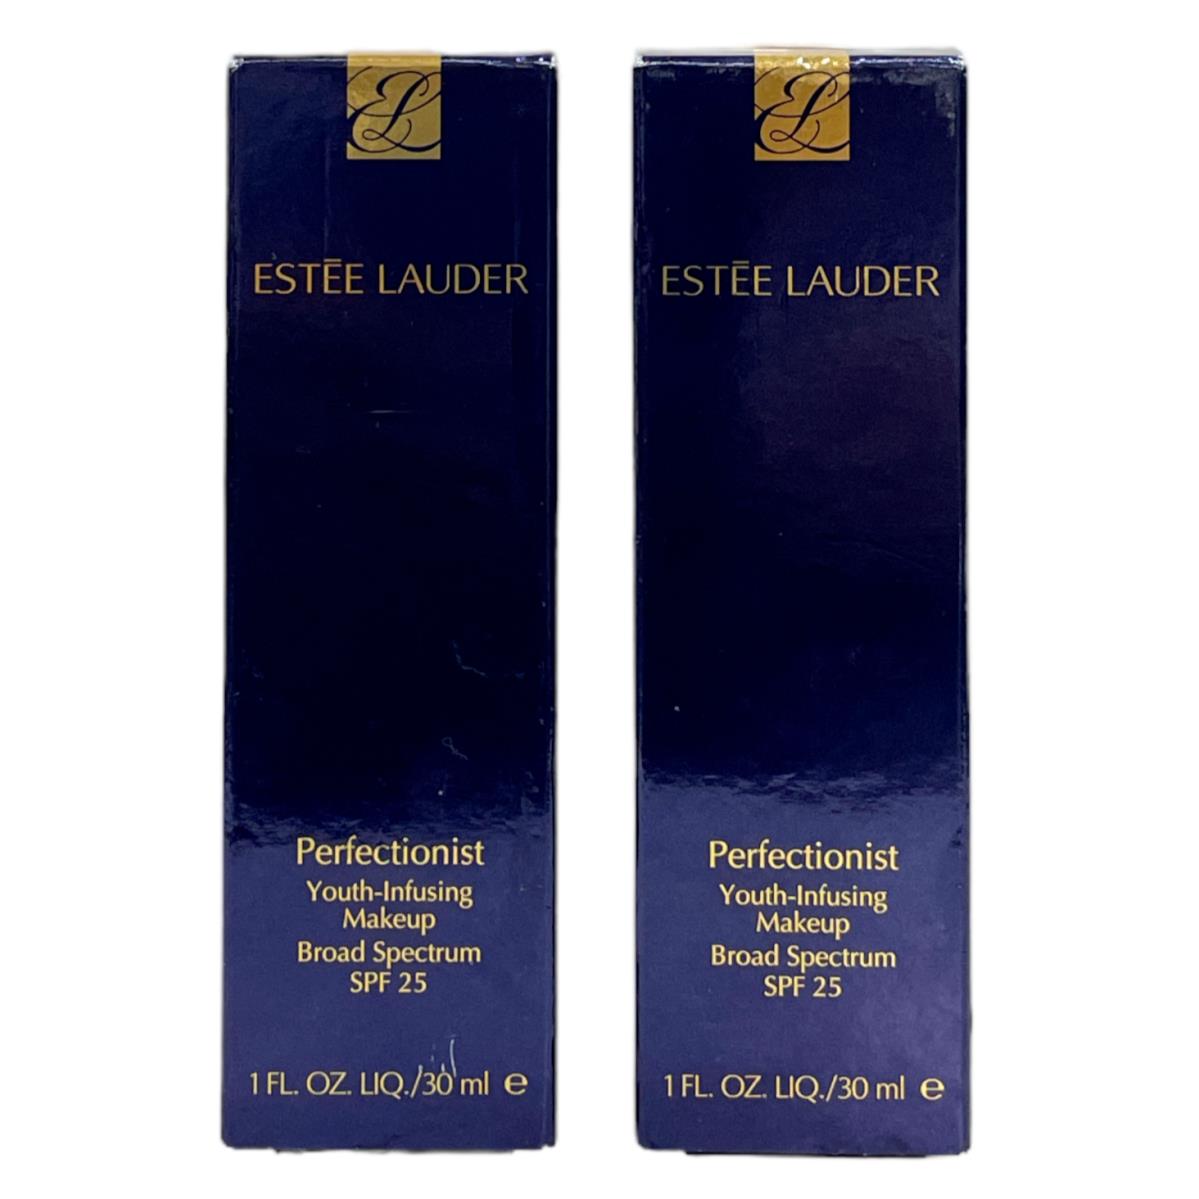 Estee Lauder Perfectionist Youth Infusing Makeup SPF25 1oz / 30mL You Pick